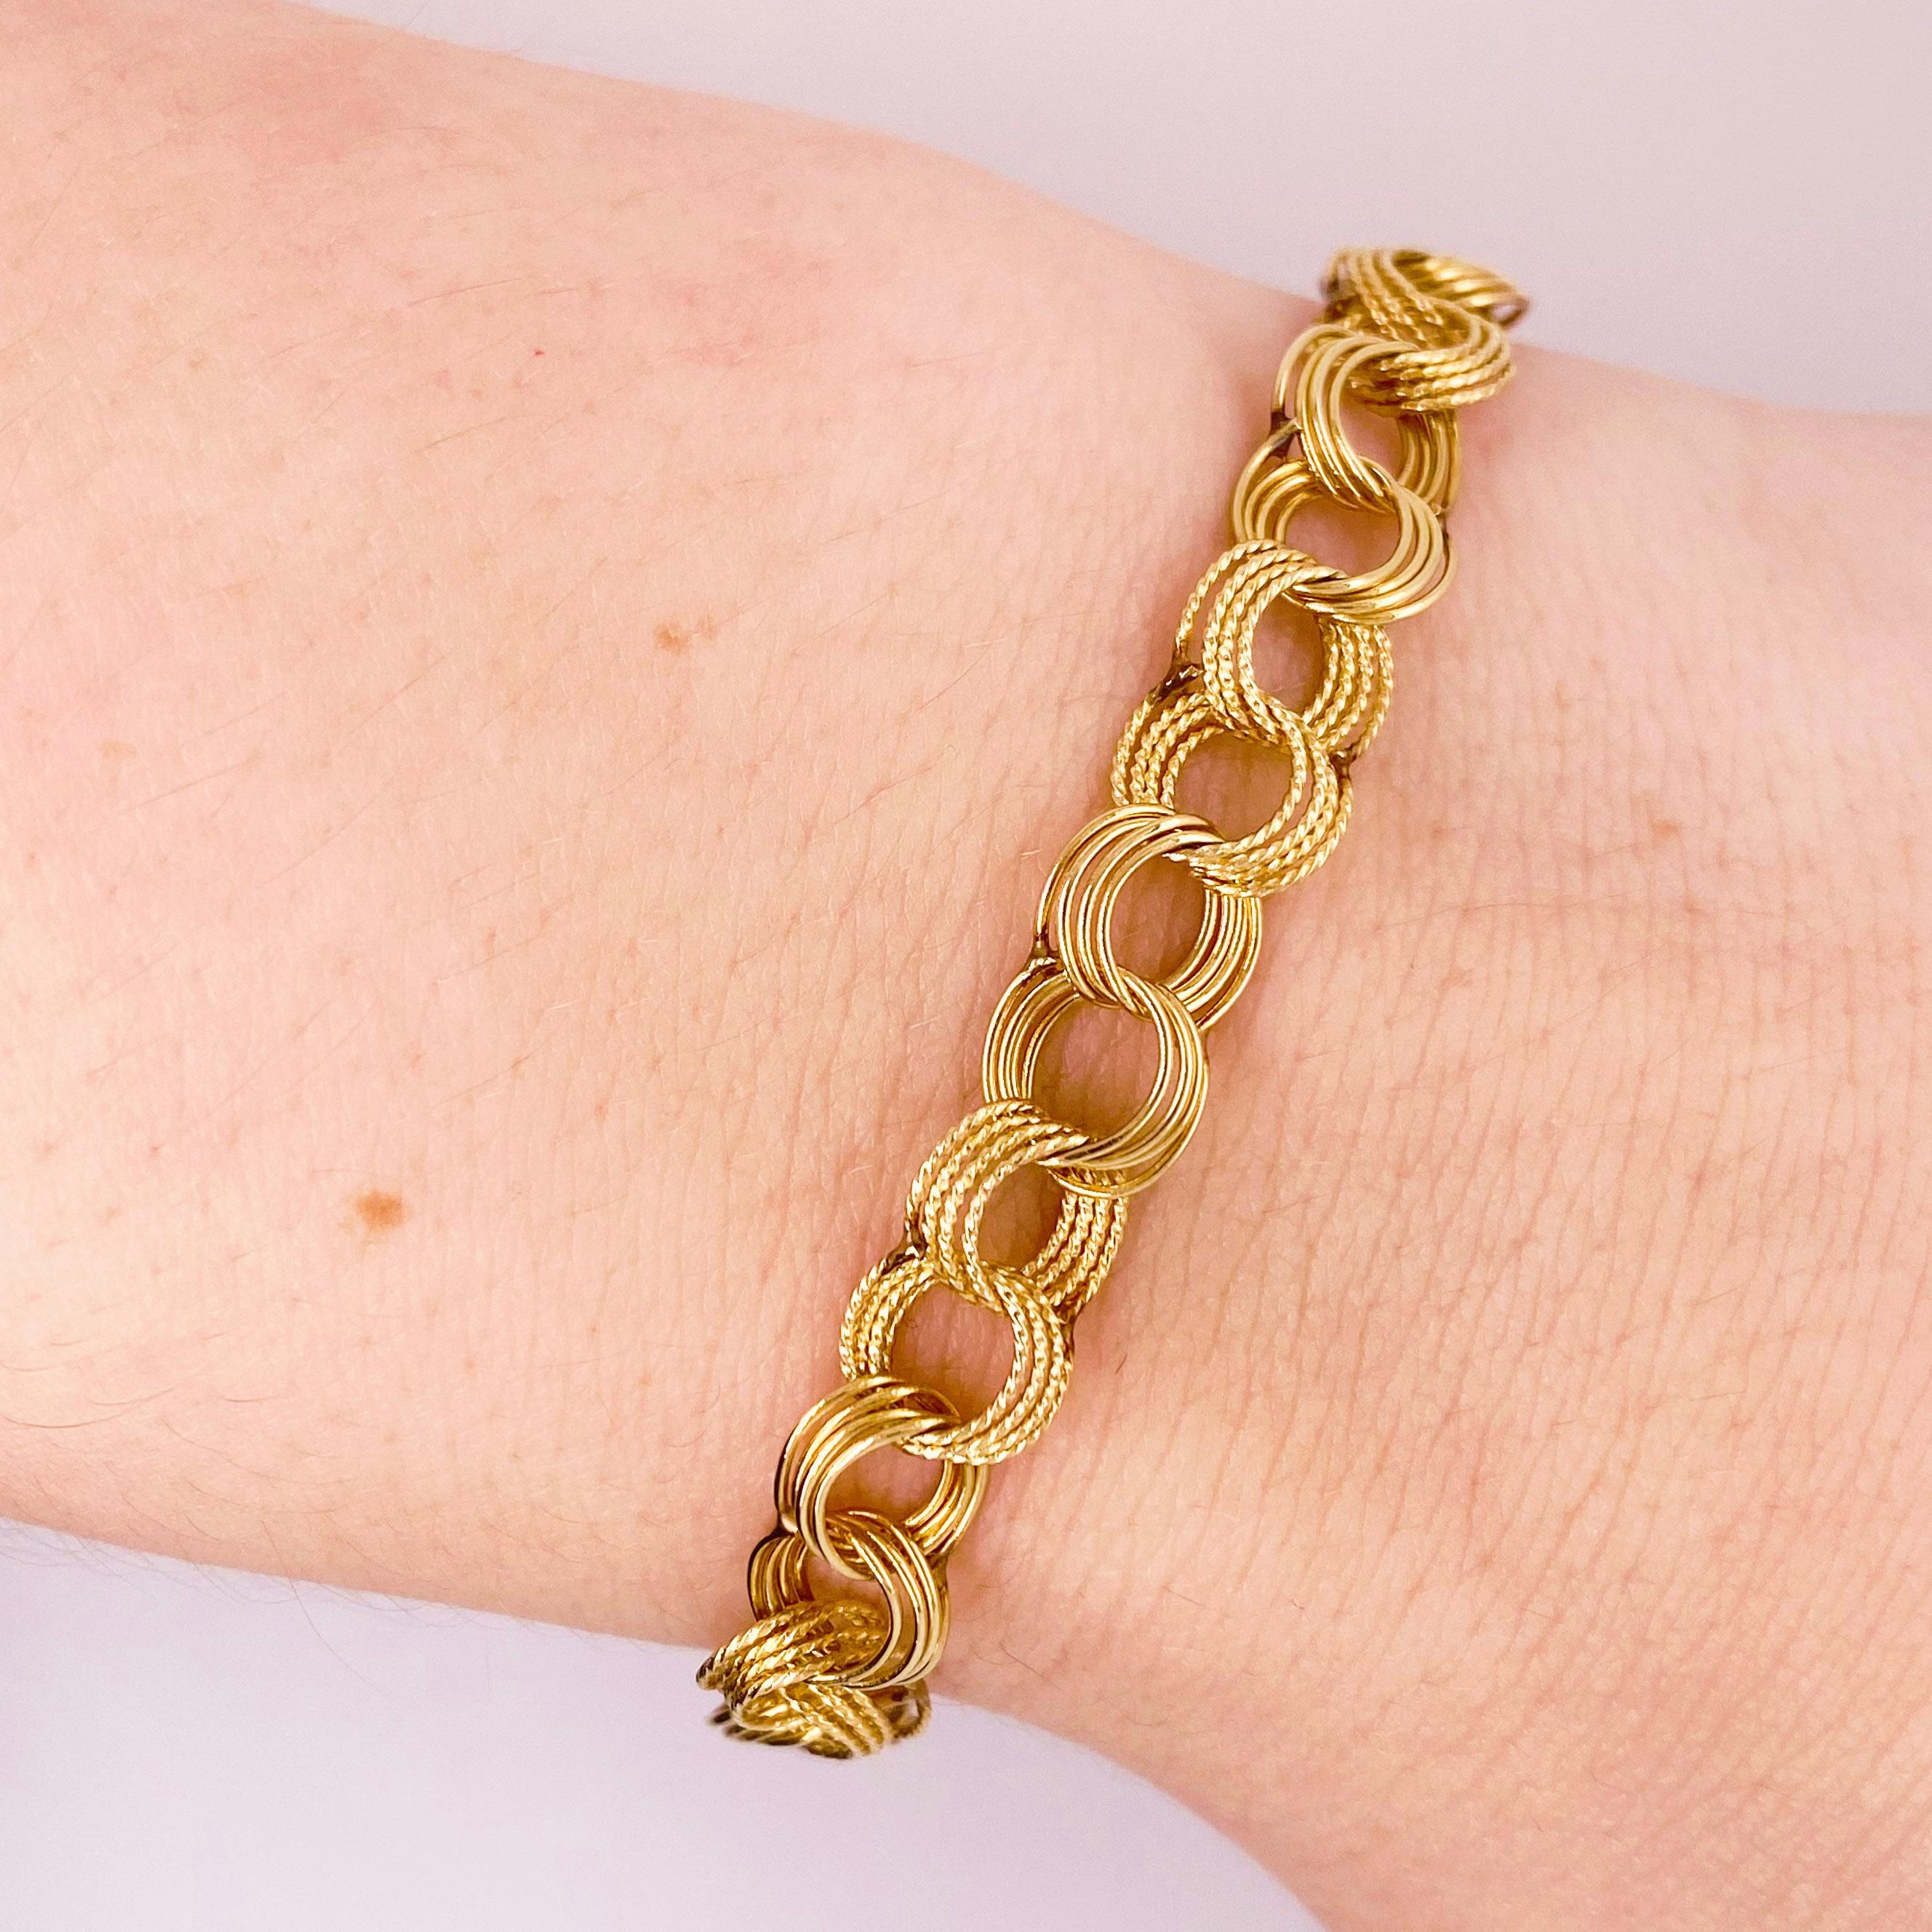 This is a handmade fancy link charm bracelet! Each link was handmade and put together to make this gorgeous, quadruple link design. The bracelet is solid 14 karat yellow gold with a strong lobster clasp. This bracelet can be worn on its own or can